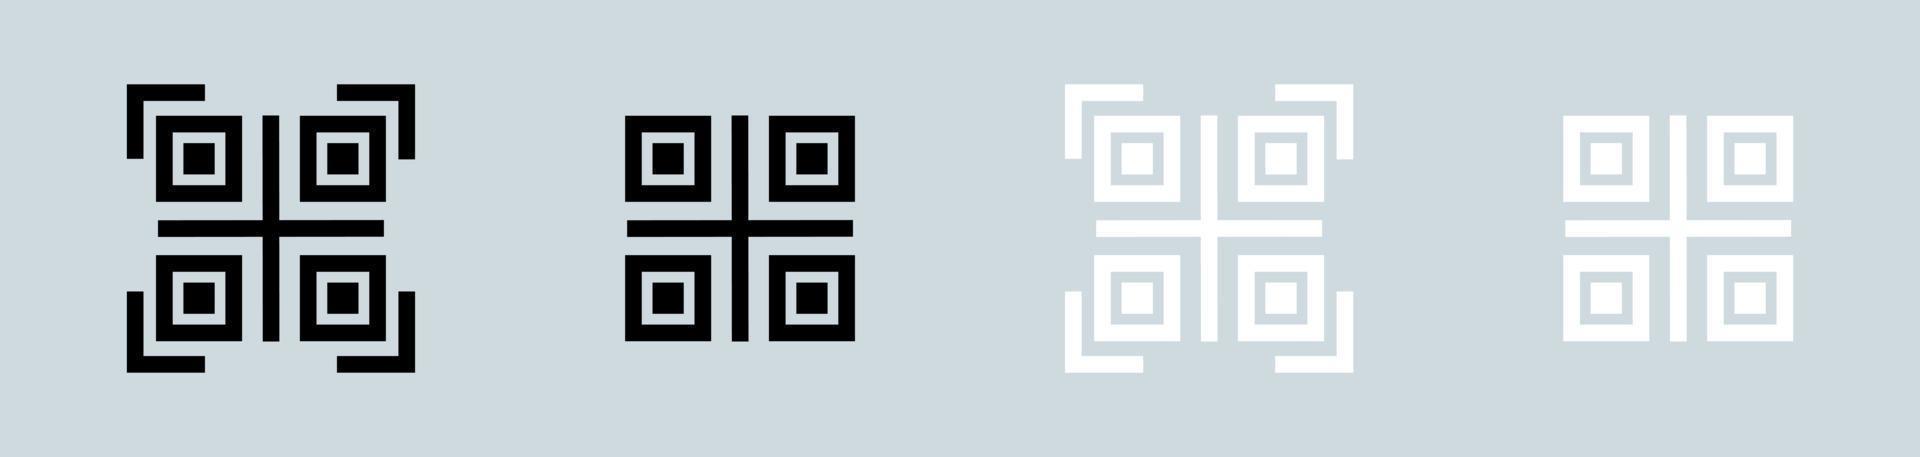 QR code vector icon. Scanning qr code symbol collection in black and white colors.